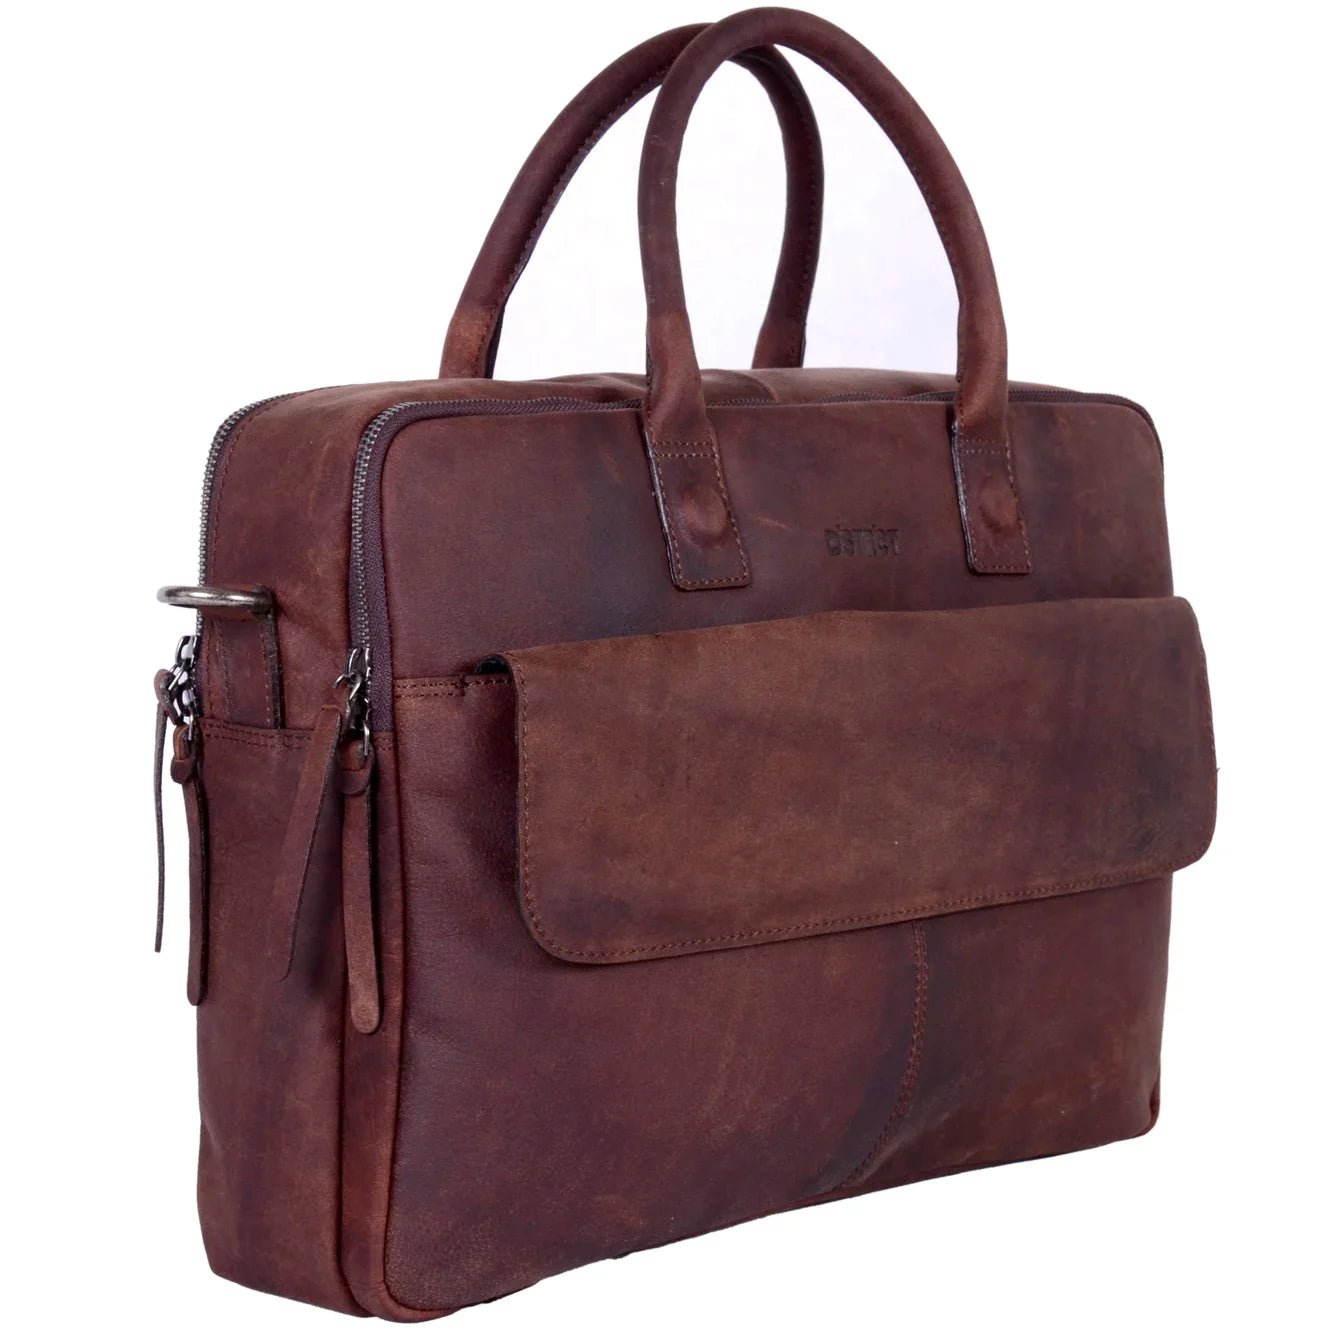 DSTRCT Wall Street Delta Business Briefcase 43 cm - brown